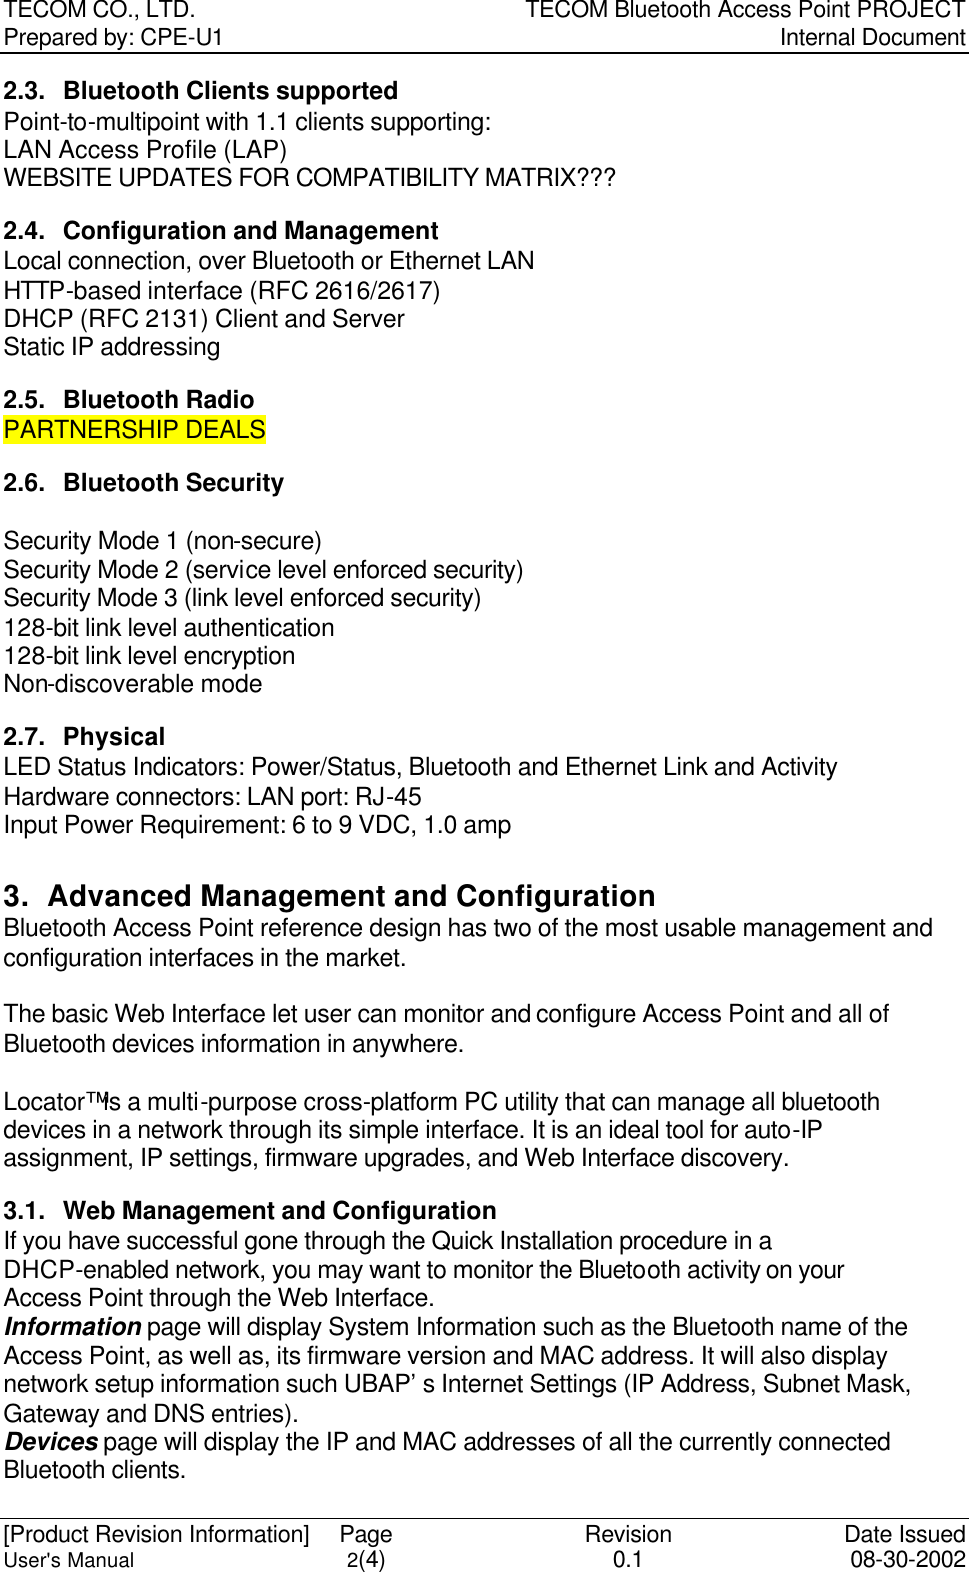 TECOM CO., LTD. TECOM Bluetooth Access Point PROJECT Prepared by: CPE-U1   Internal Document  [Product Revision Information] Page Revision Date Issued User&apos;s Manual 2(4) 0.1 08-30-2002 2.3. Bluetooth Clients supported Point-to-multipoint with 1.1 clients supporting: LAN Access Profile (LAP) WEBSITE UPDATES FOR COMPATIBILITY MATRIX??? 2.4. Configuration and Management Local connection, over Bluetooth or Ethernet LAN HTTP-based interface (RFC 2616/2617) DHCP (RFC 2131) Client and Server Static IP addressing 2.5. Bluetooth Radio PARTNERSHIP DEALS 2.6. Bluetooth Security  Security Mode 1 (non-secure) Security Mode 2 (service level enforced security) Security Mode 3 (link level enforced security) 128-bit link level authentication 128-bit link level encryption Non-discoverable mode 2.7. Physical LED Status Indicators: Power/Status, Bluetooth and Ethernet Link and Activity Hardware connectors: LAN port: RJ-45 Input Power Requirement: 6 to 9 VDC, 1.0 amp  3. Advanced Management and Configuration Bluetooth Access Point reference design has two of the most usable management and configuration interfaces in the market.    The basic Web Interface let user can monitor and configure Access Point and all of Bluetooth devices information in anywhere.    Locator™ is a multi-purpose cross-platform PC utility that can manage all bluetooth devices in a network through its simple interface. It is an ideal tool for auto-IP assignment, IP settings, firmware upgrades, and Web Interface discovery. 3.1. Web Management and Configuration If you have successful gone through the Quick Installation procedure in a DHCP-enabled network, you may want to monitor the Bluetooth activity on your Access Point through the Web Interface.   Information page will display System Information such as the Bluetooth name of the Access Point, as well as, its firmware version and MAC address. It will also display network setup information such UBAP’s Internet Settings (IP Address, Subnet Mask, Gateway and DNS entries).   Devices page will display the IP and MAC addresses of all the currently connected Bluetooth clients.    